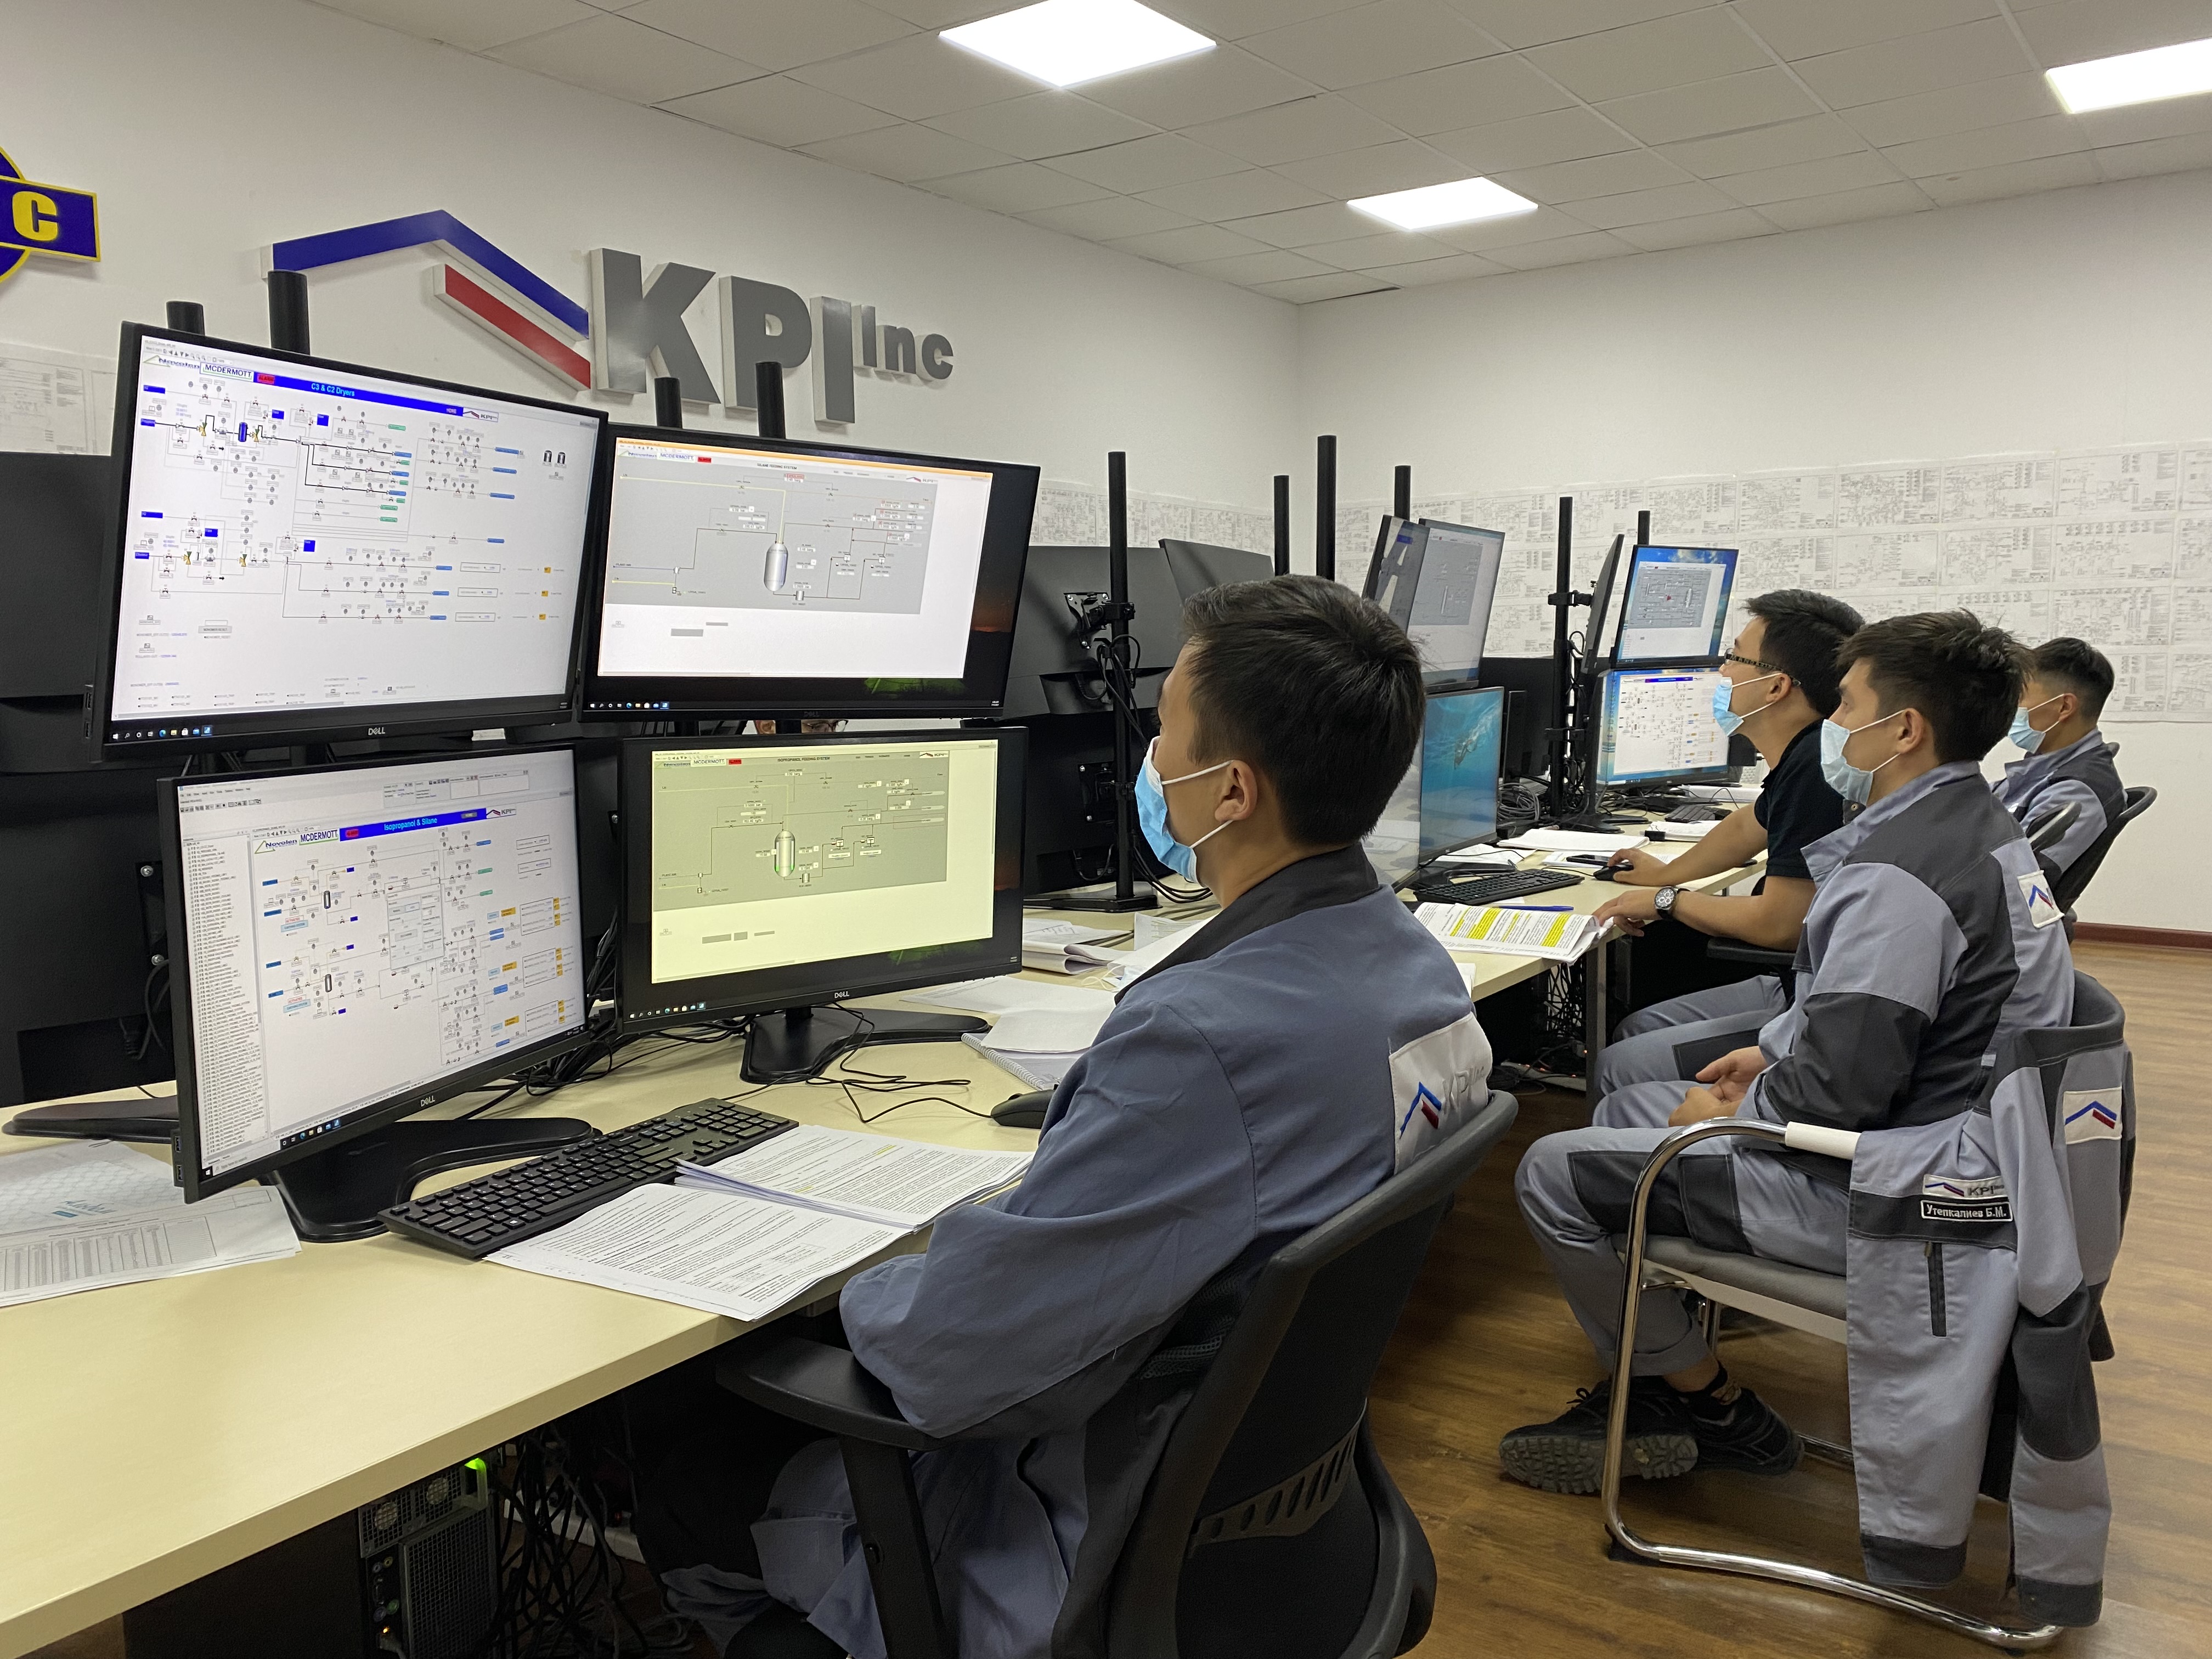 The first “digital” plant in Kazakhstan trains specialists